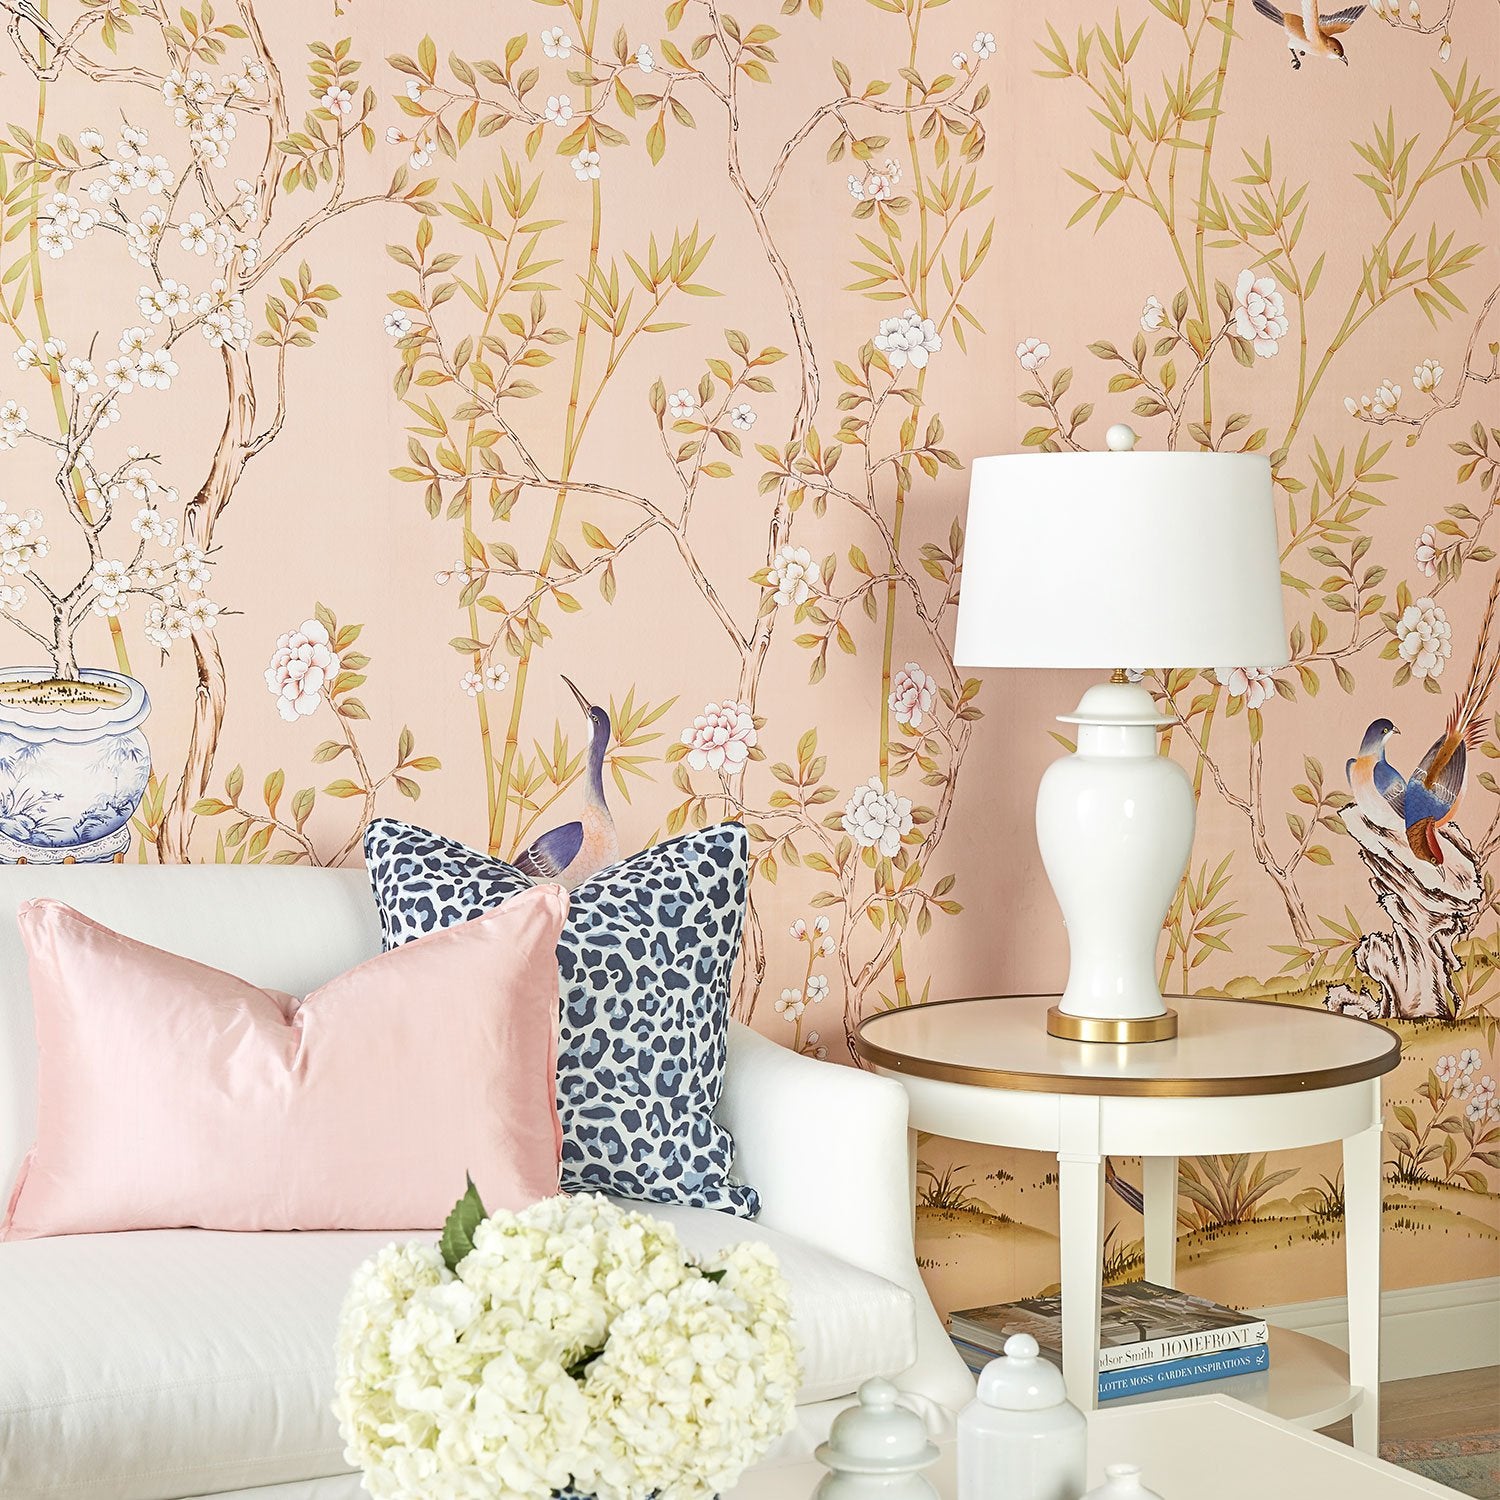 Belfort in Blush Chinoiserie Wallpaper on Living Room Wall